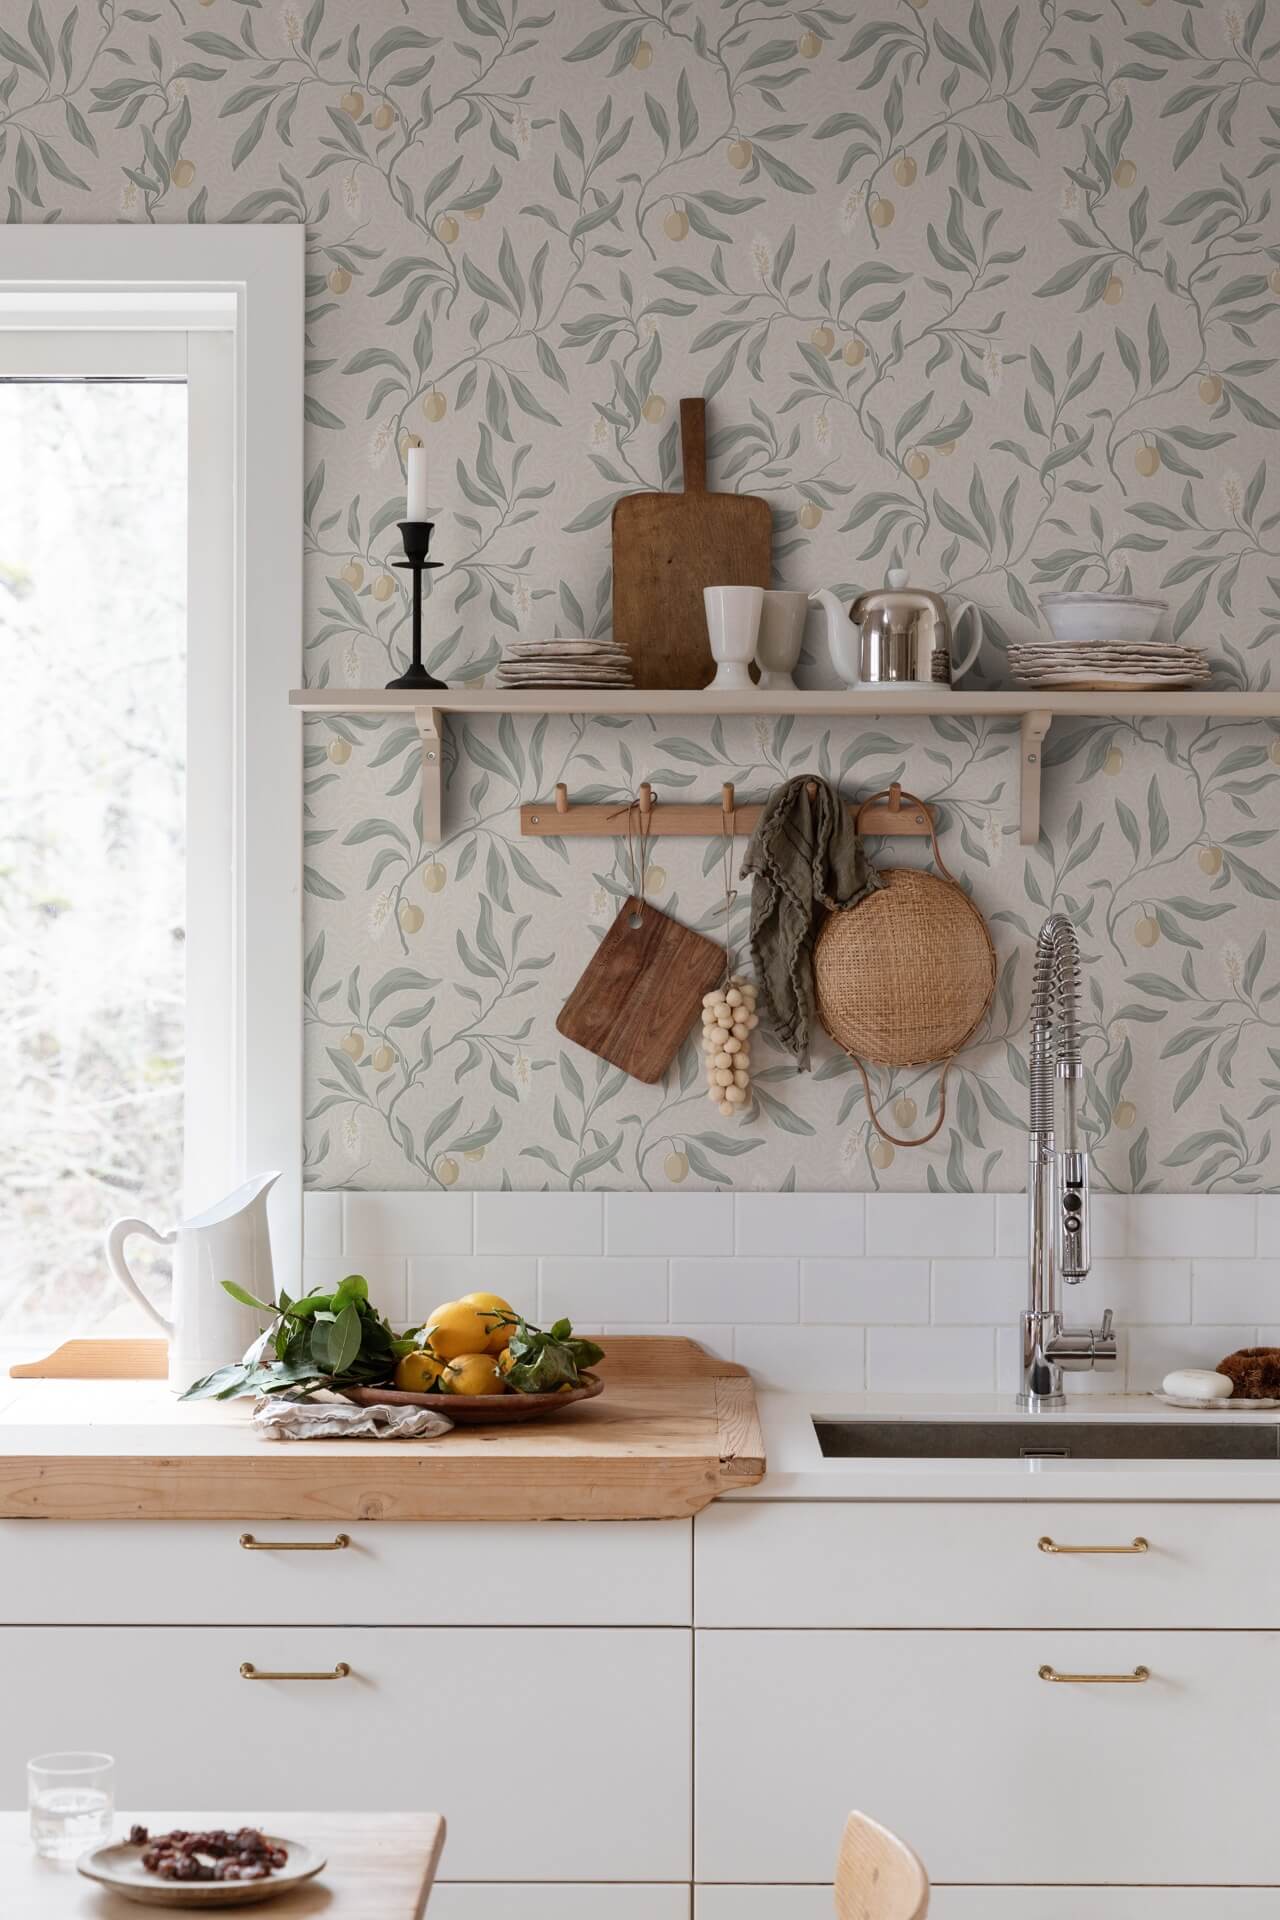 15 of the best independent wallpaper brands